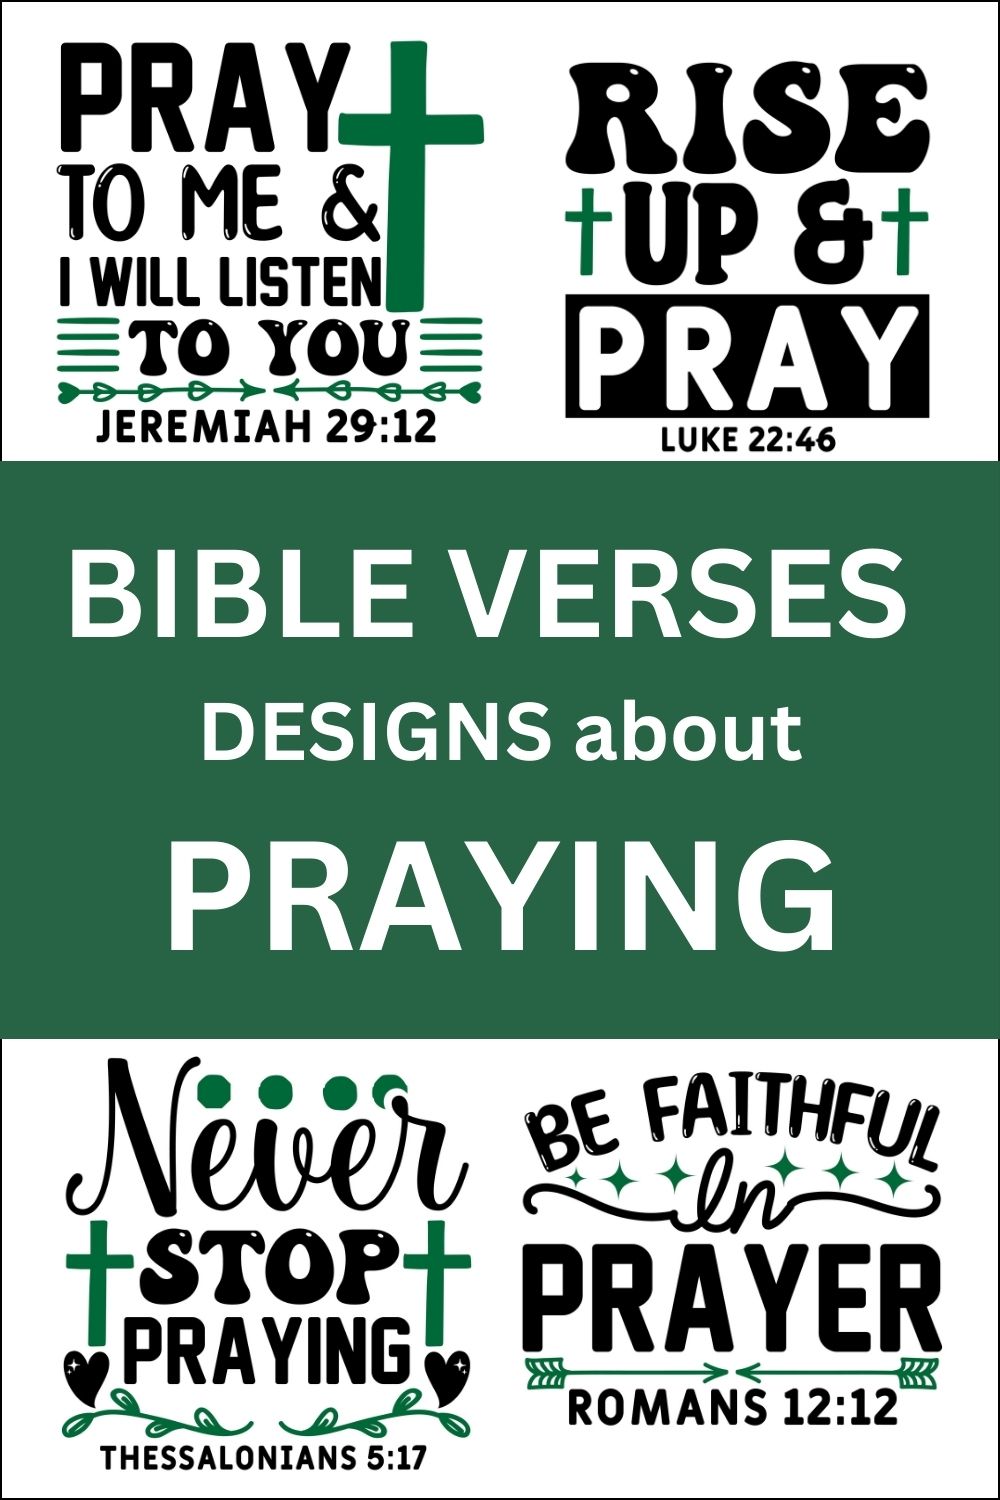 Free printable bundle of Bible Verses about Praying, scripture passages, Cricut designs, DIY patterns, svg files, templates, clip art, stencils, silhouette, embroidery, cut files, design space, vector, crafts, laser cutting, and DIY crafts.